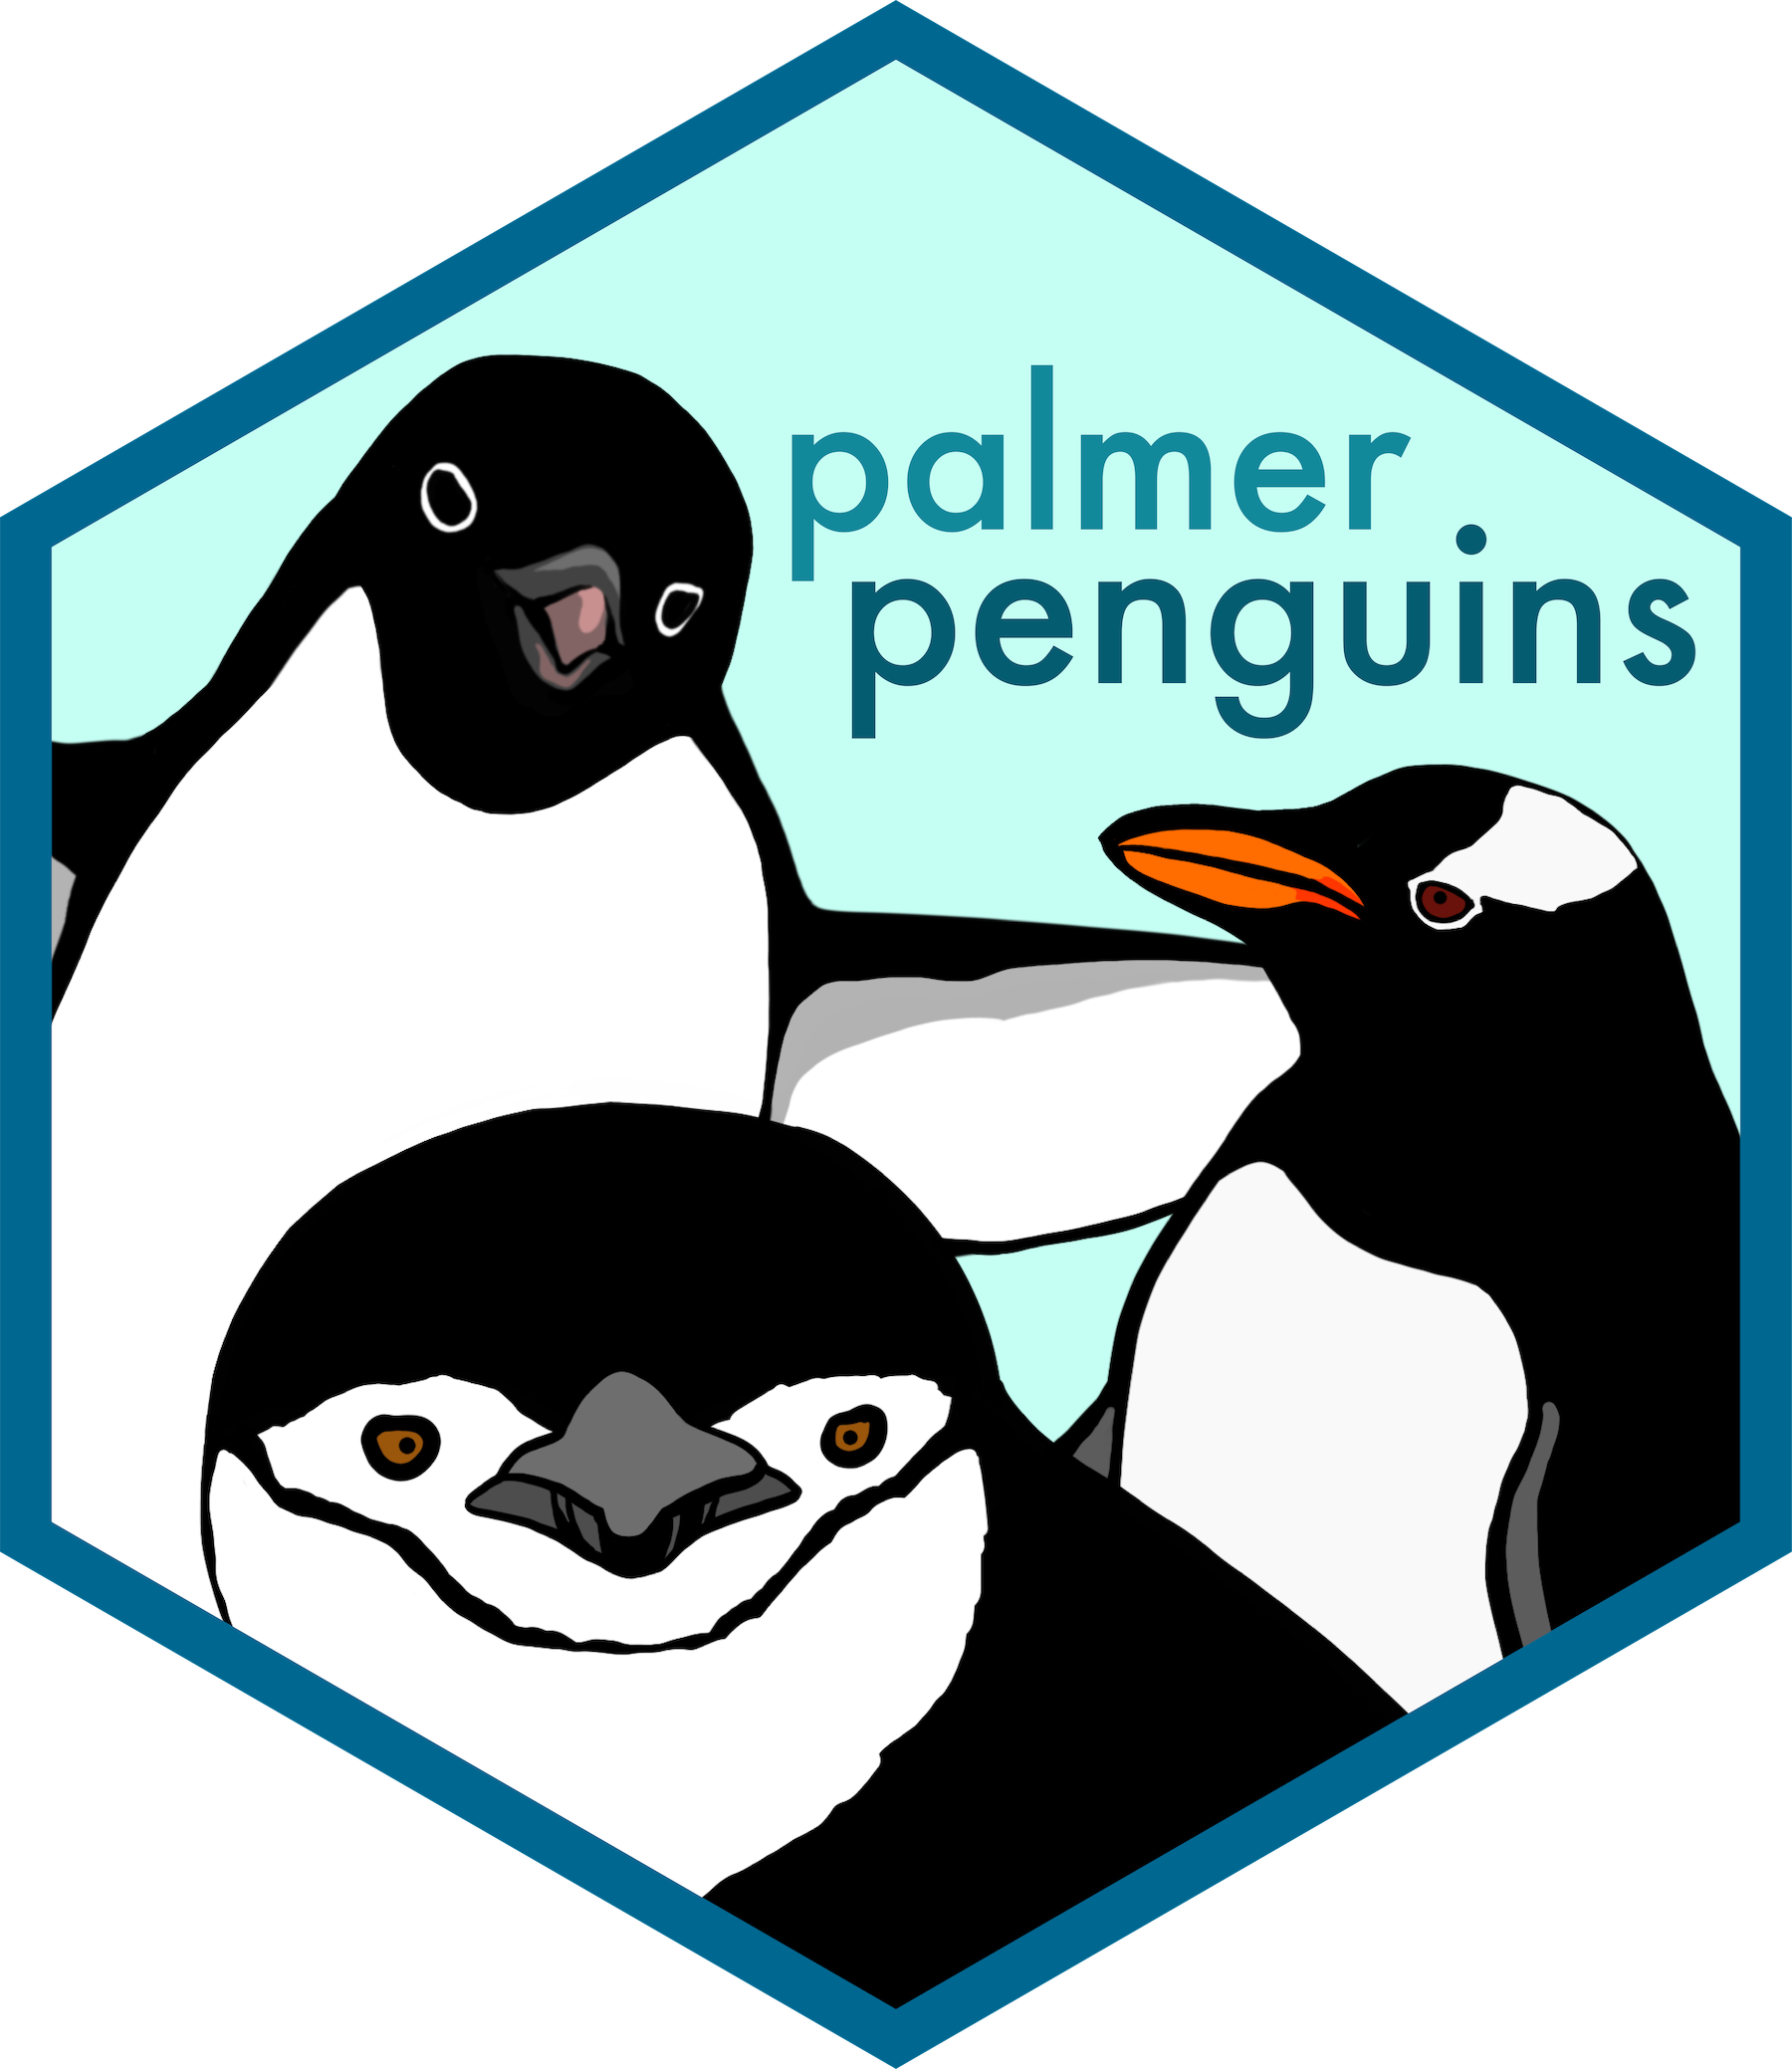 hex sticker for the palmer penguins package, including 3 really cute penguins